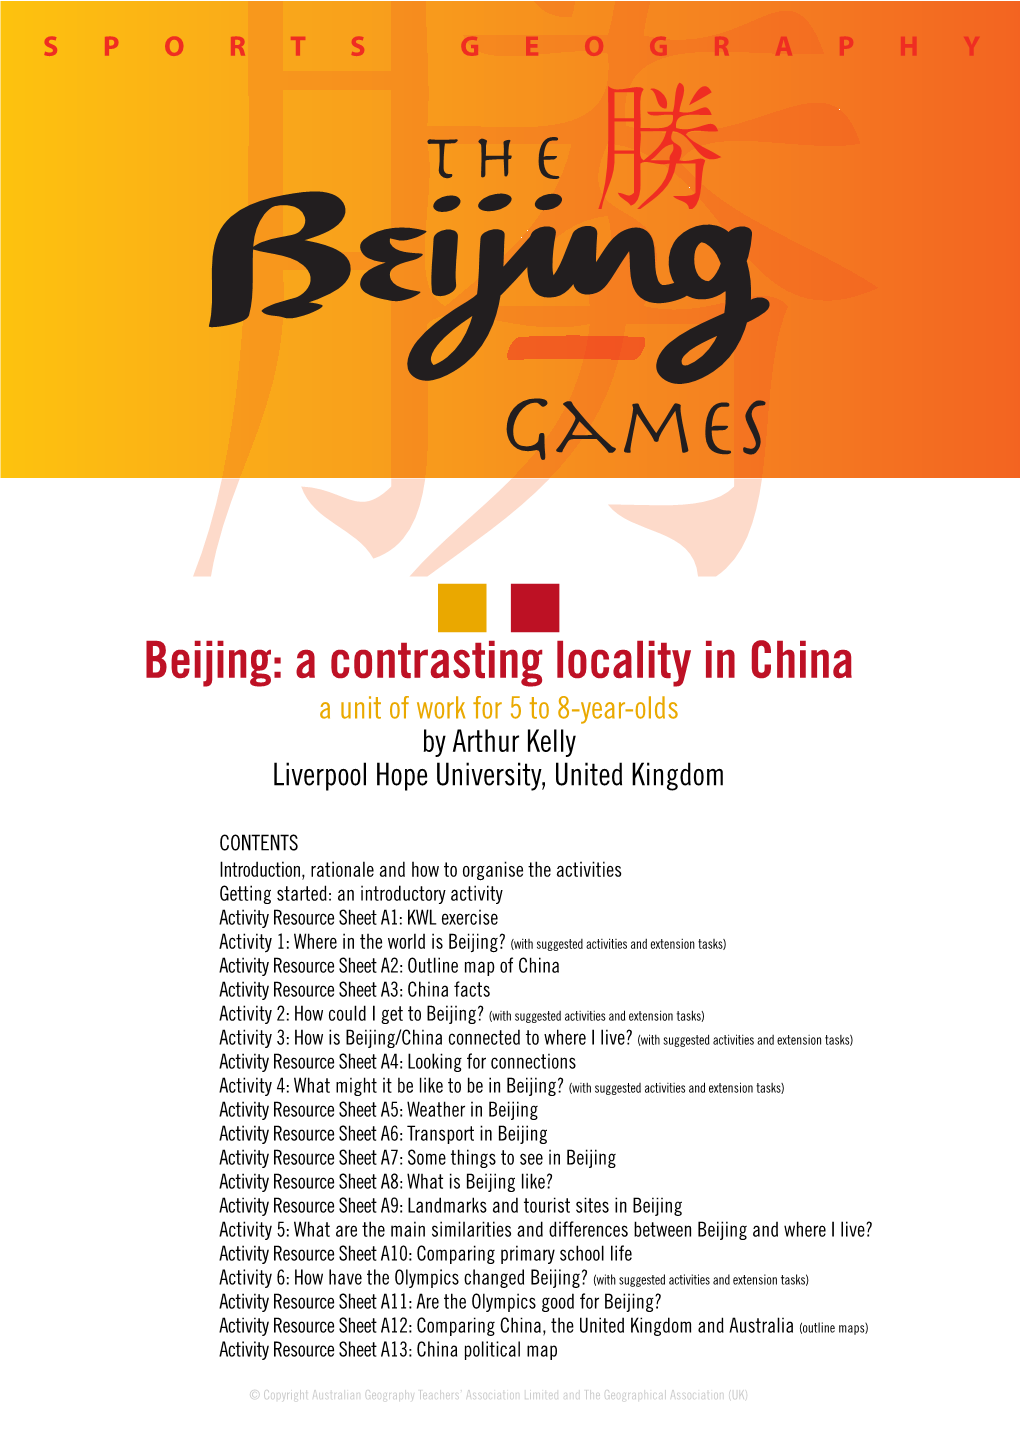 Beijing: a Contrasting Locality in China a Unit of Work for 5 to 8-Year-Olds by Arthur Kelly Liverpool Hope University, United Kingdom